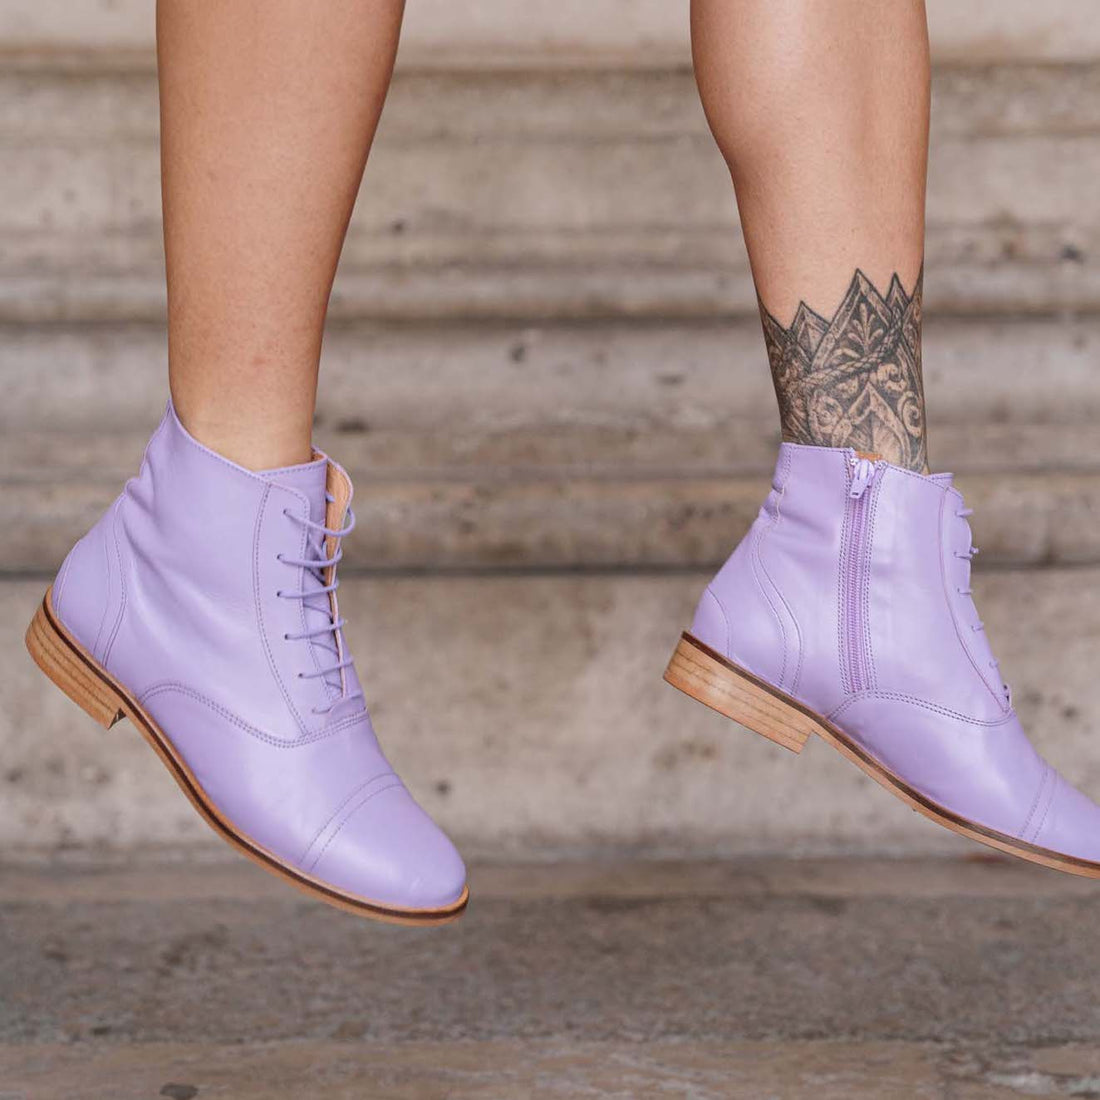 Chaussures Swing Bottines Lilas Cuir 1